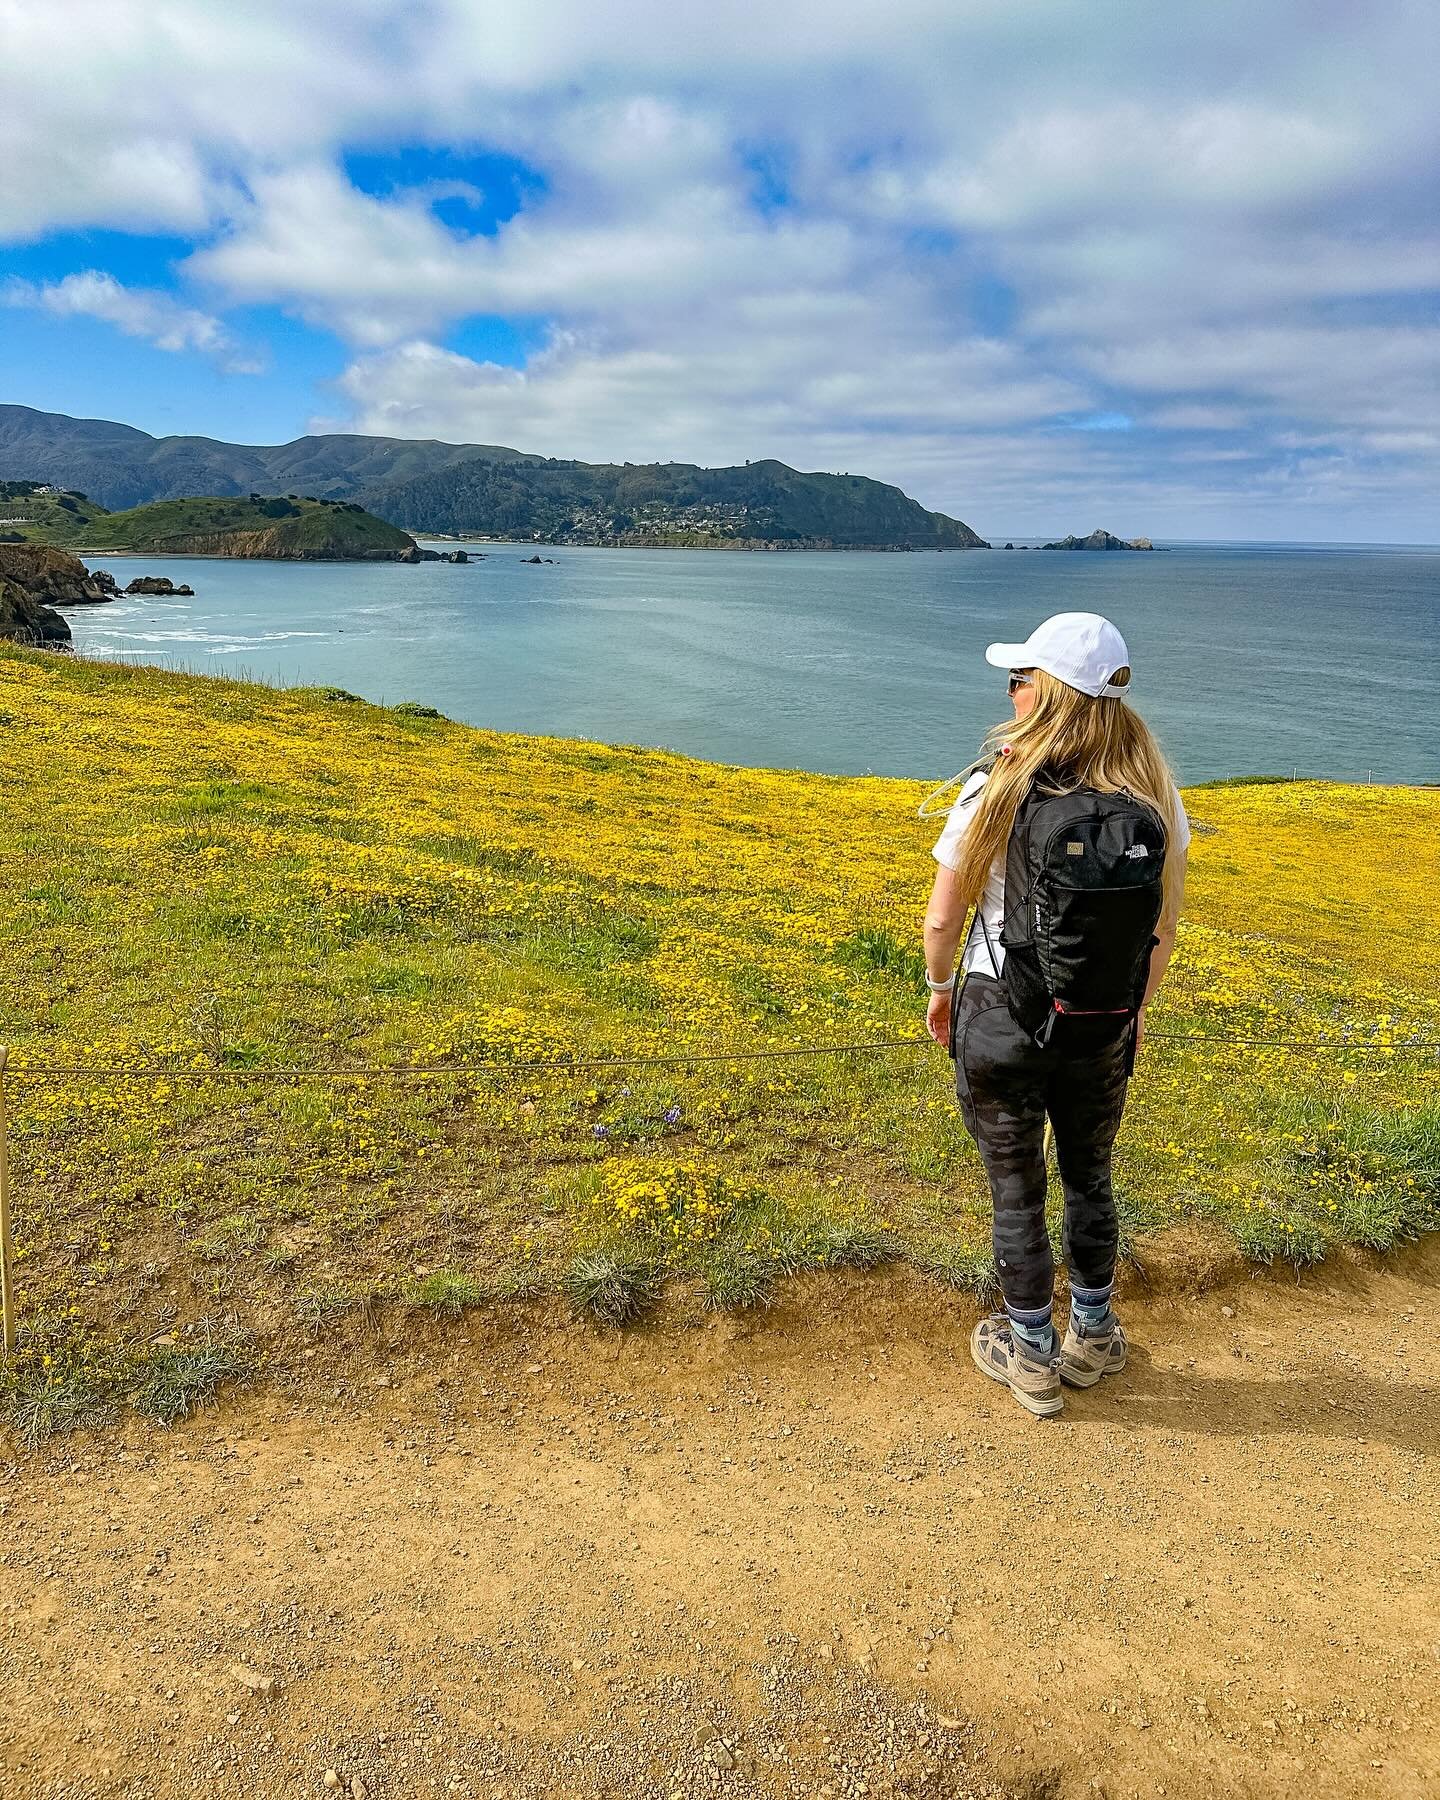 &ldquo;Wild and free, just like the sea.&rdquo; 🌊

Honestly one of the most beautiful days and hikes to do. I normally head over to Marine but I was craving some ocean views and we got lucky to find all these amazing fields of yellow wildflowers. 

